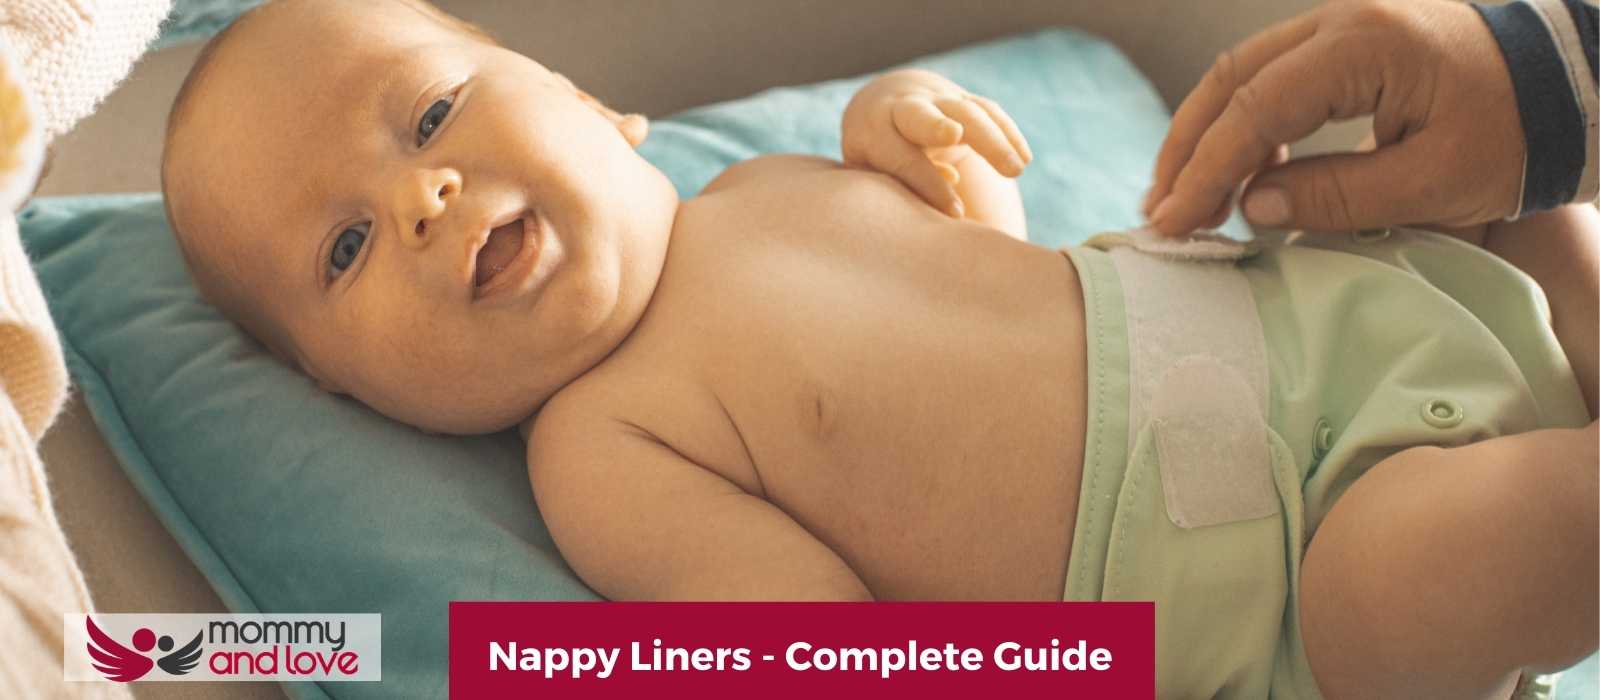 Nappy Liners - Complete Guide